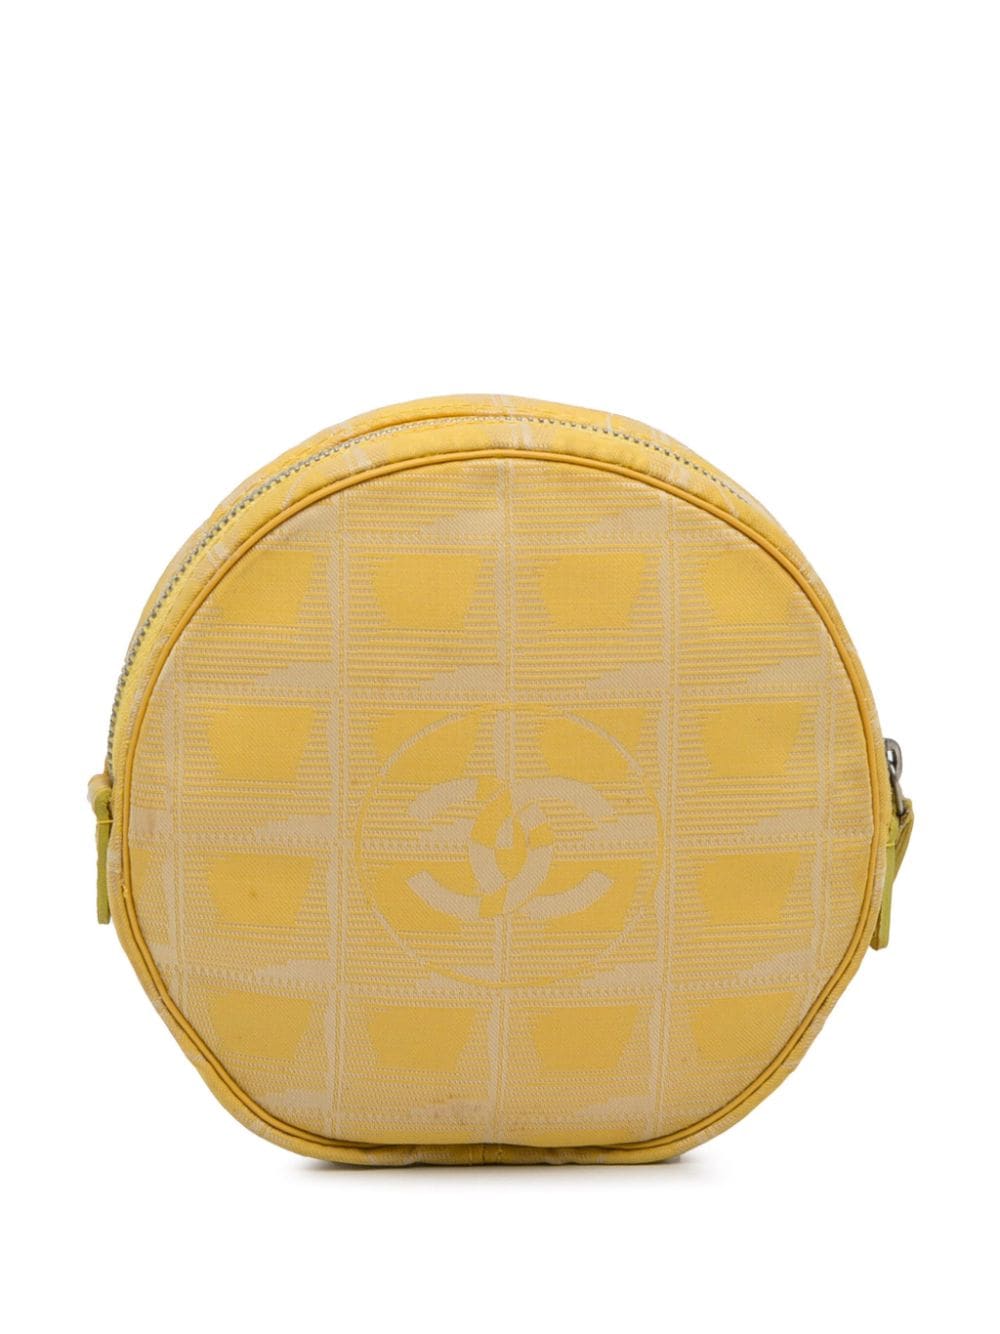 Pre-owned Chanel 2002-2003 New Travel Line Nylon Pouch In Yellow